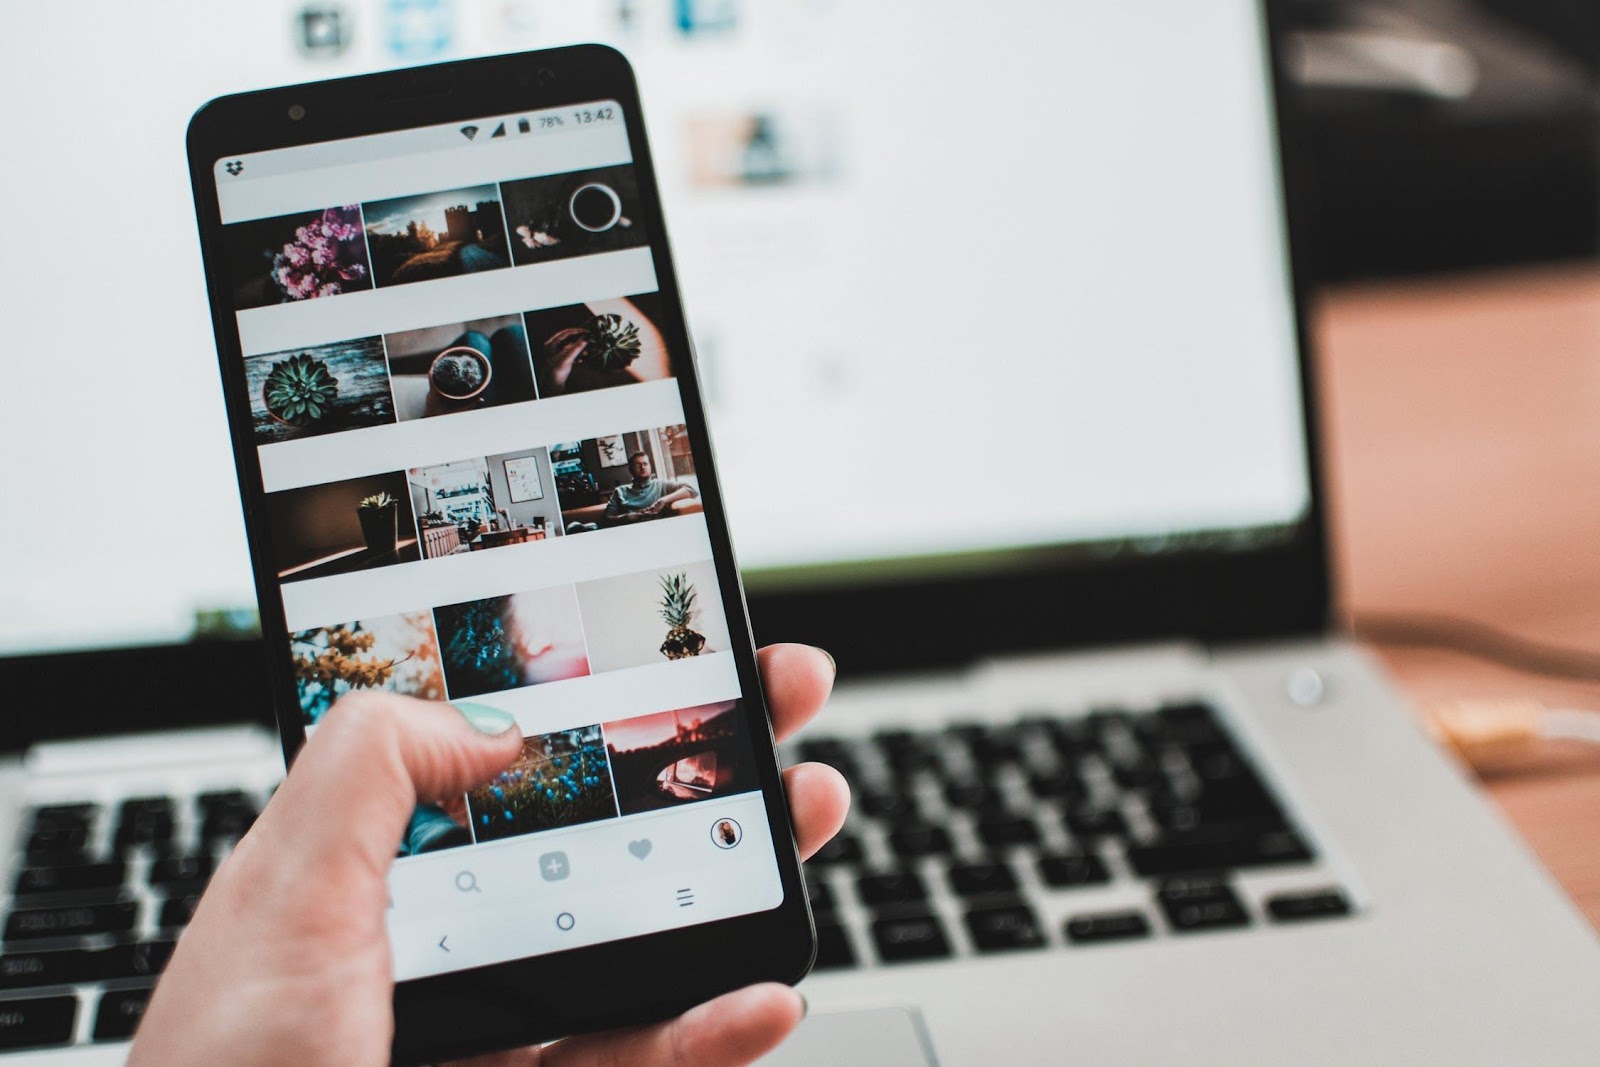 How to Make GIFs on Your Smartphone or Laptop